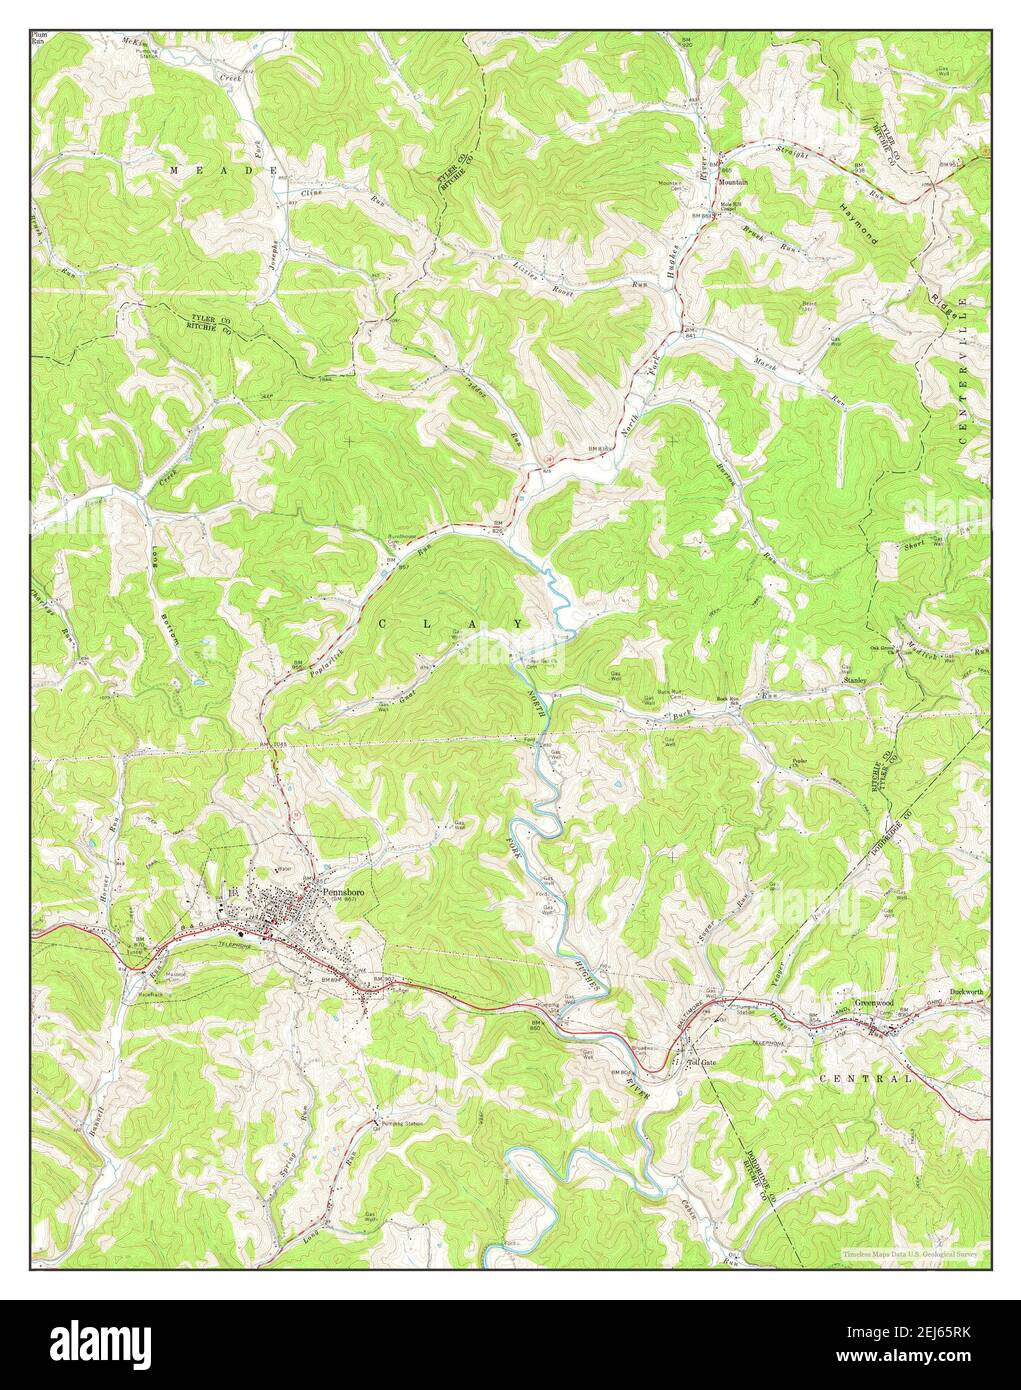 Pennsboro, West Virginia, map 1961, 1:24000, United States of America by Timeless Maps, data U.S. Geological Survey Stock Photo